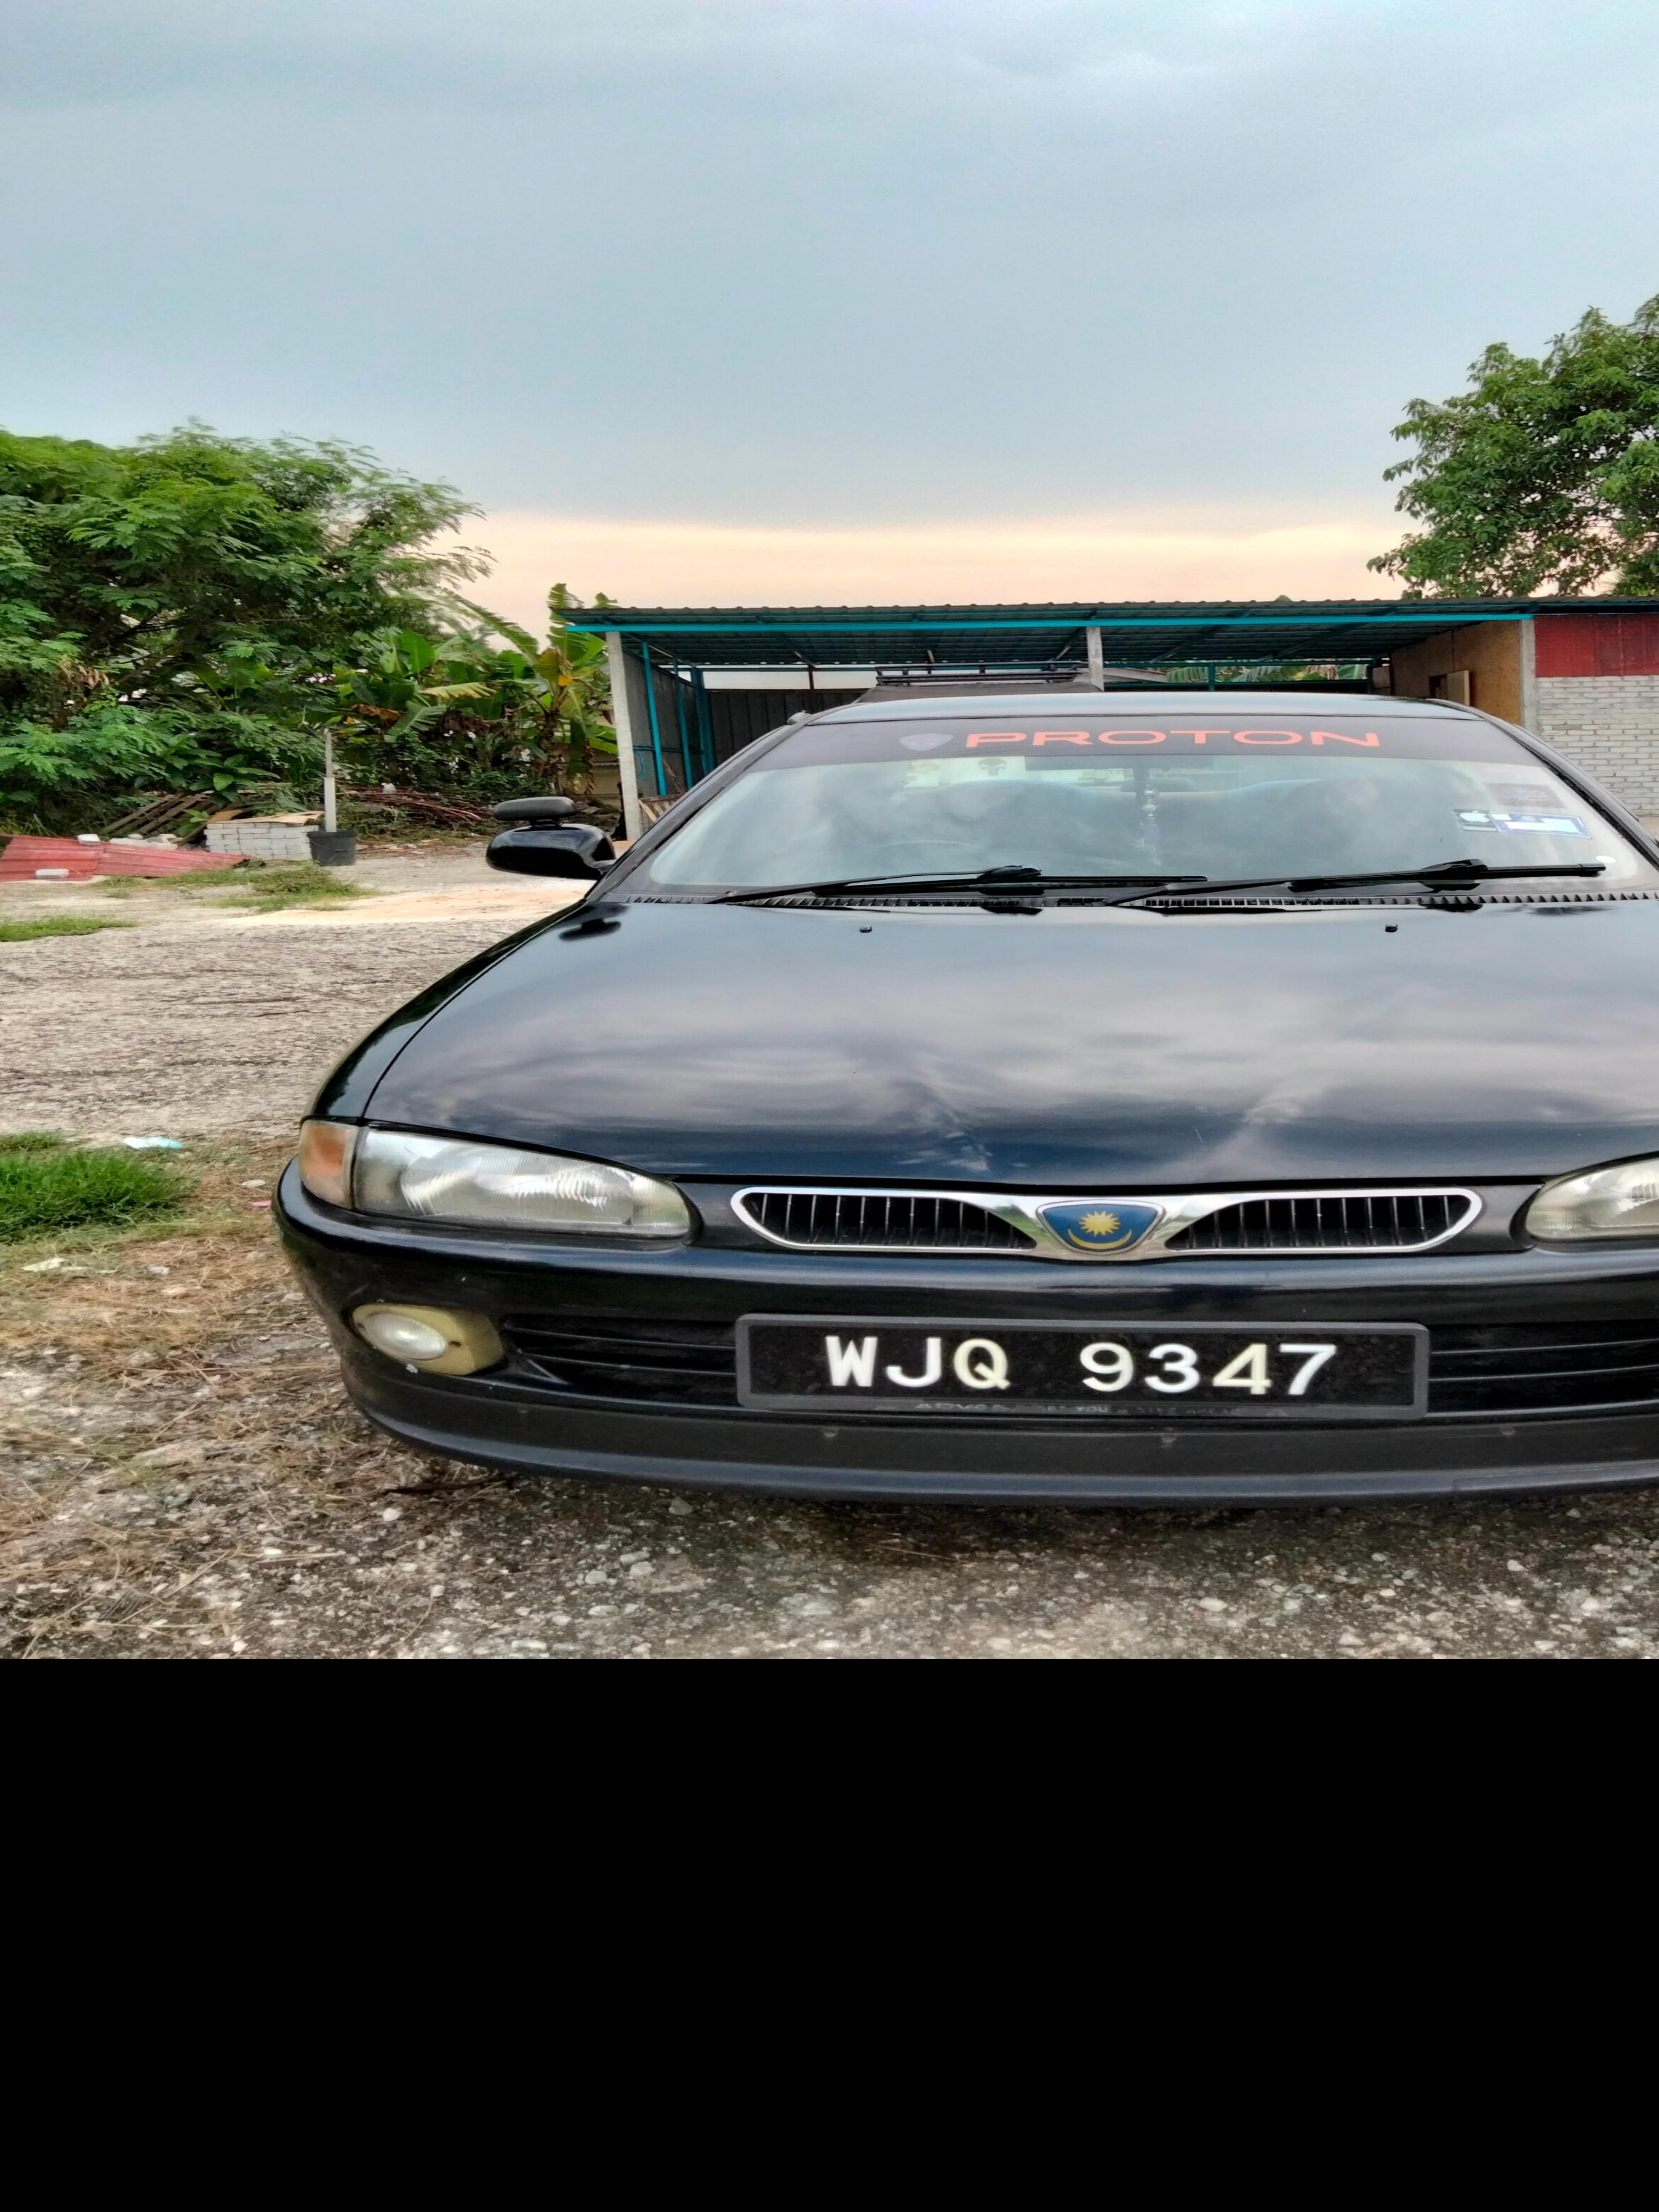 Wira 1 5 Injection Manual Cars Cars For Sale On Carousell